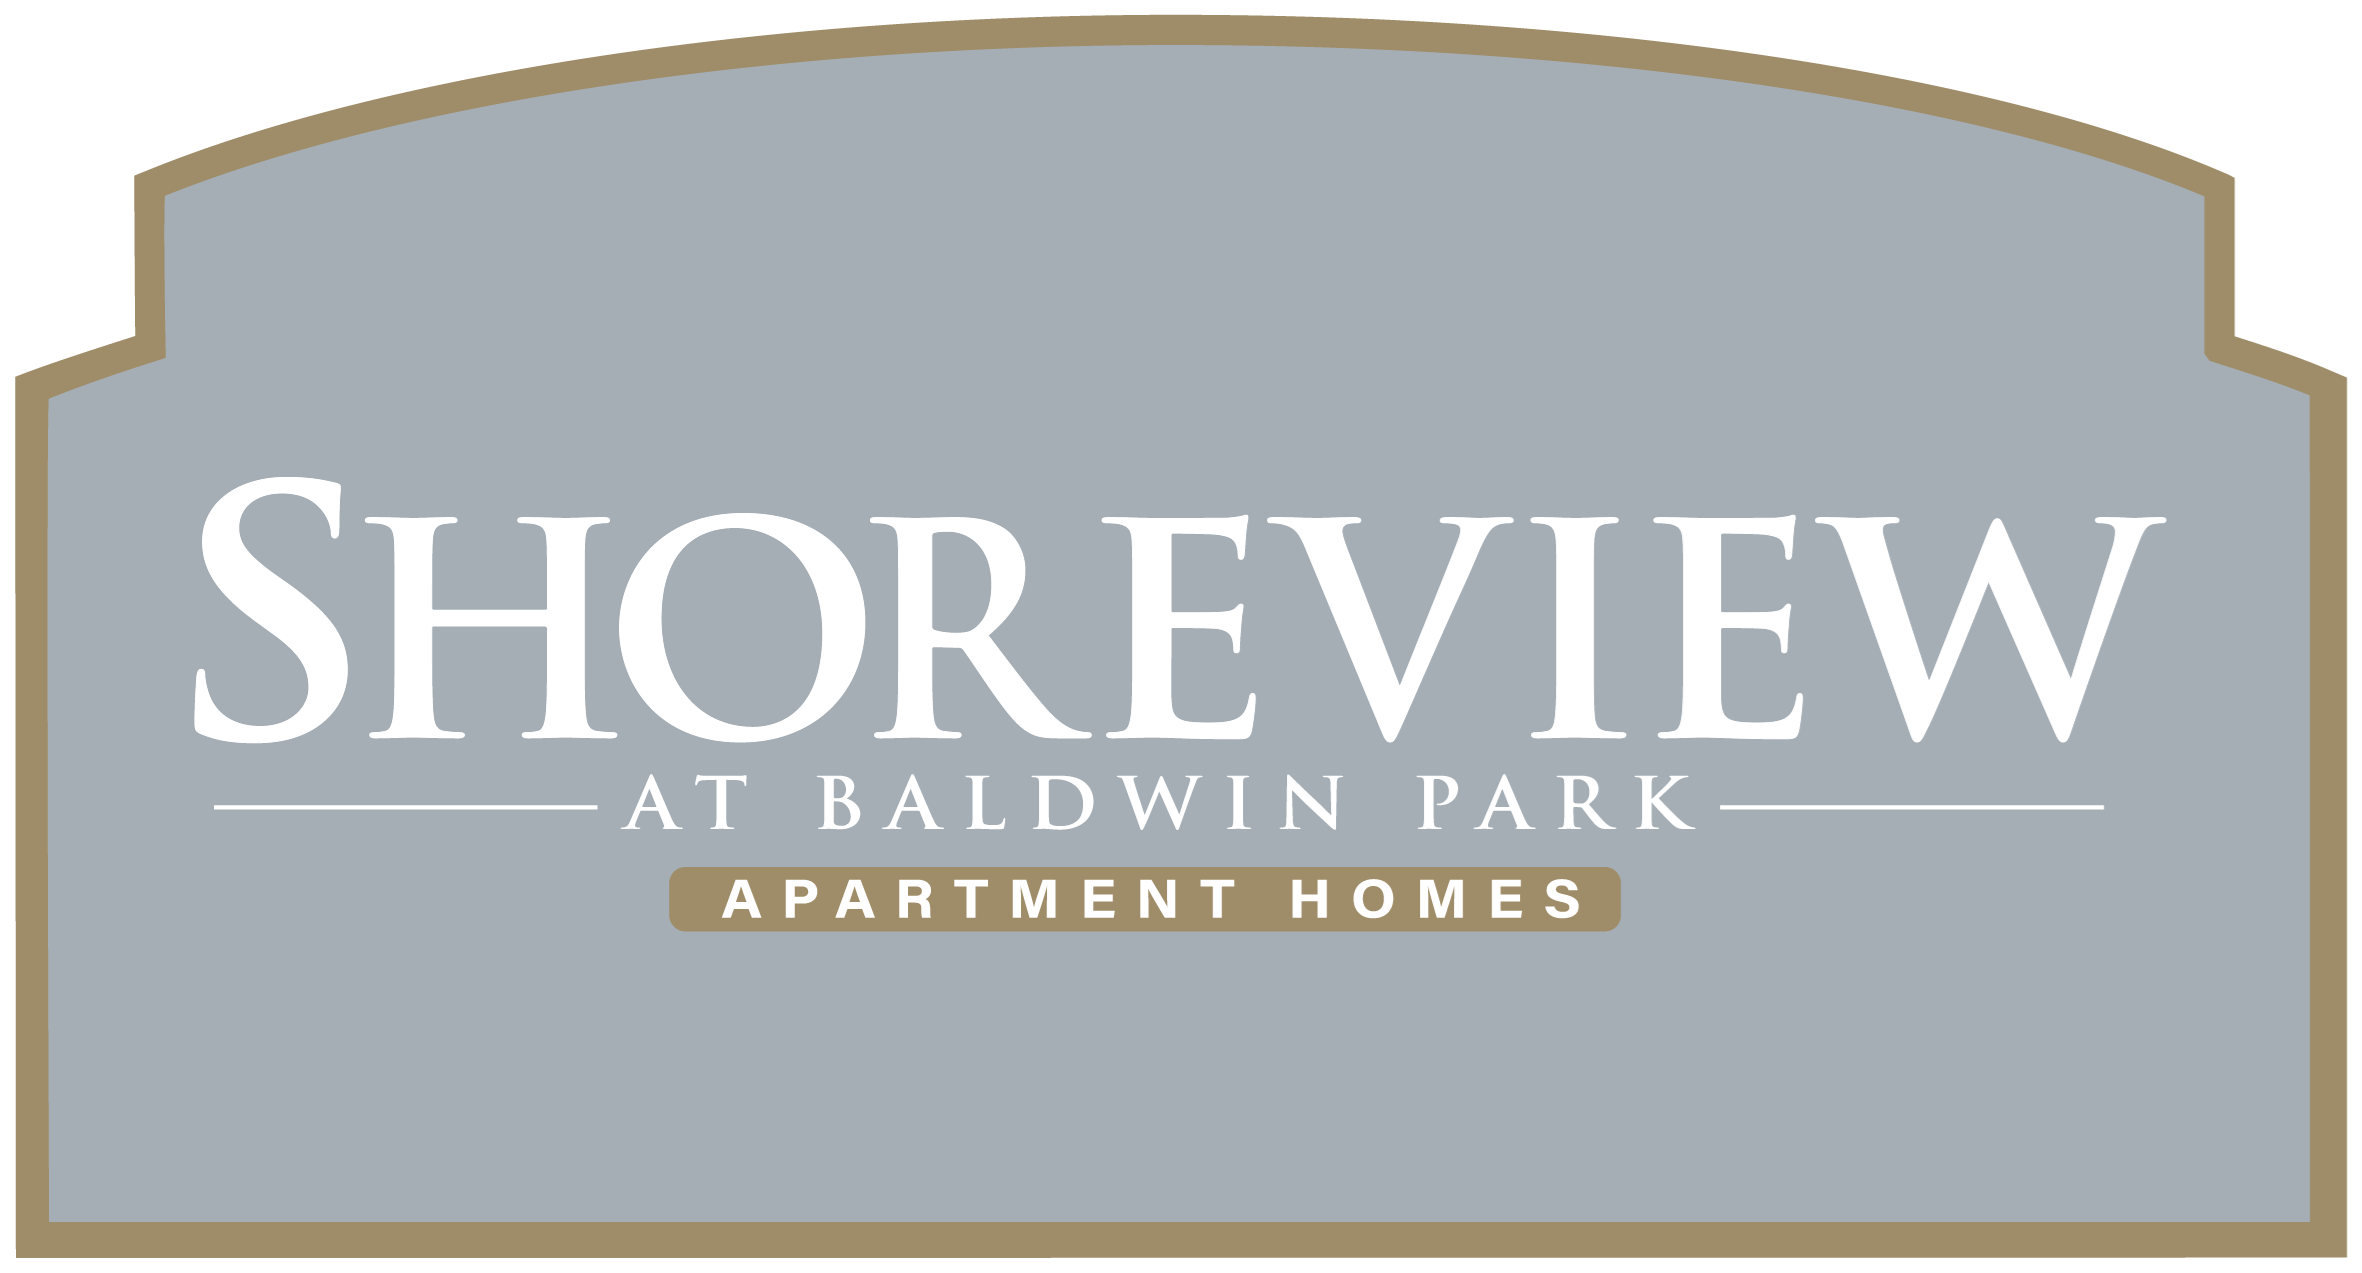 Photos and Video of Shoreview at Baldwin Park in Orlando, FL